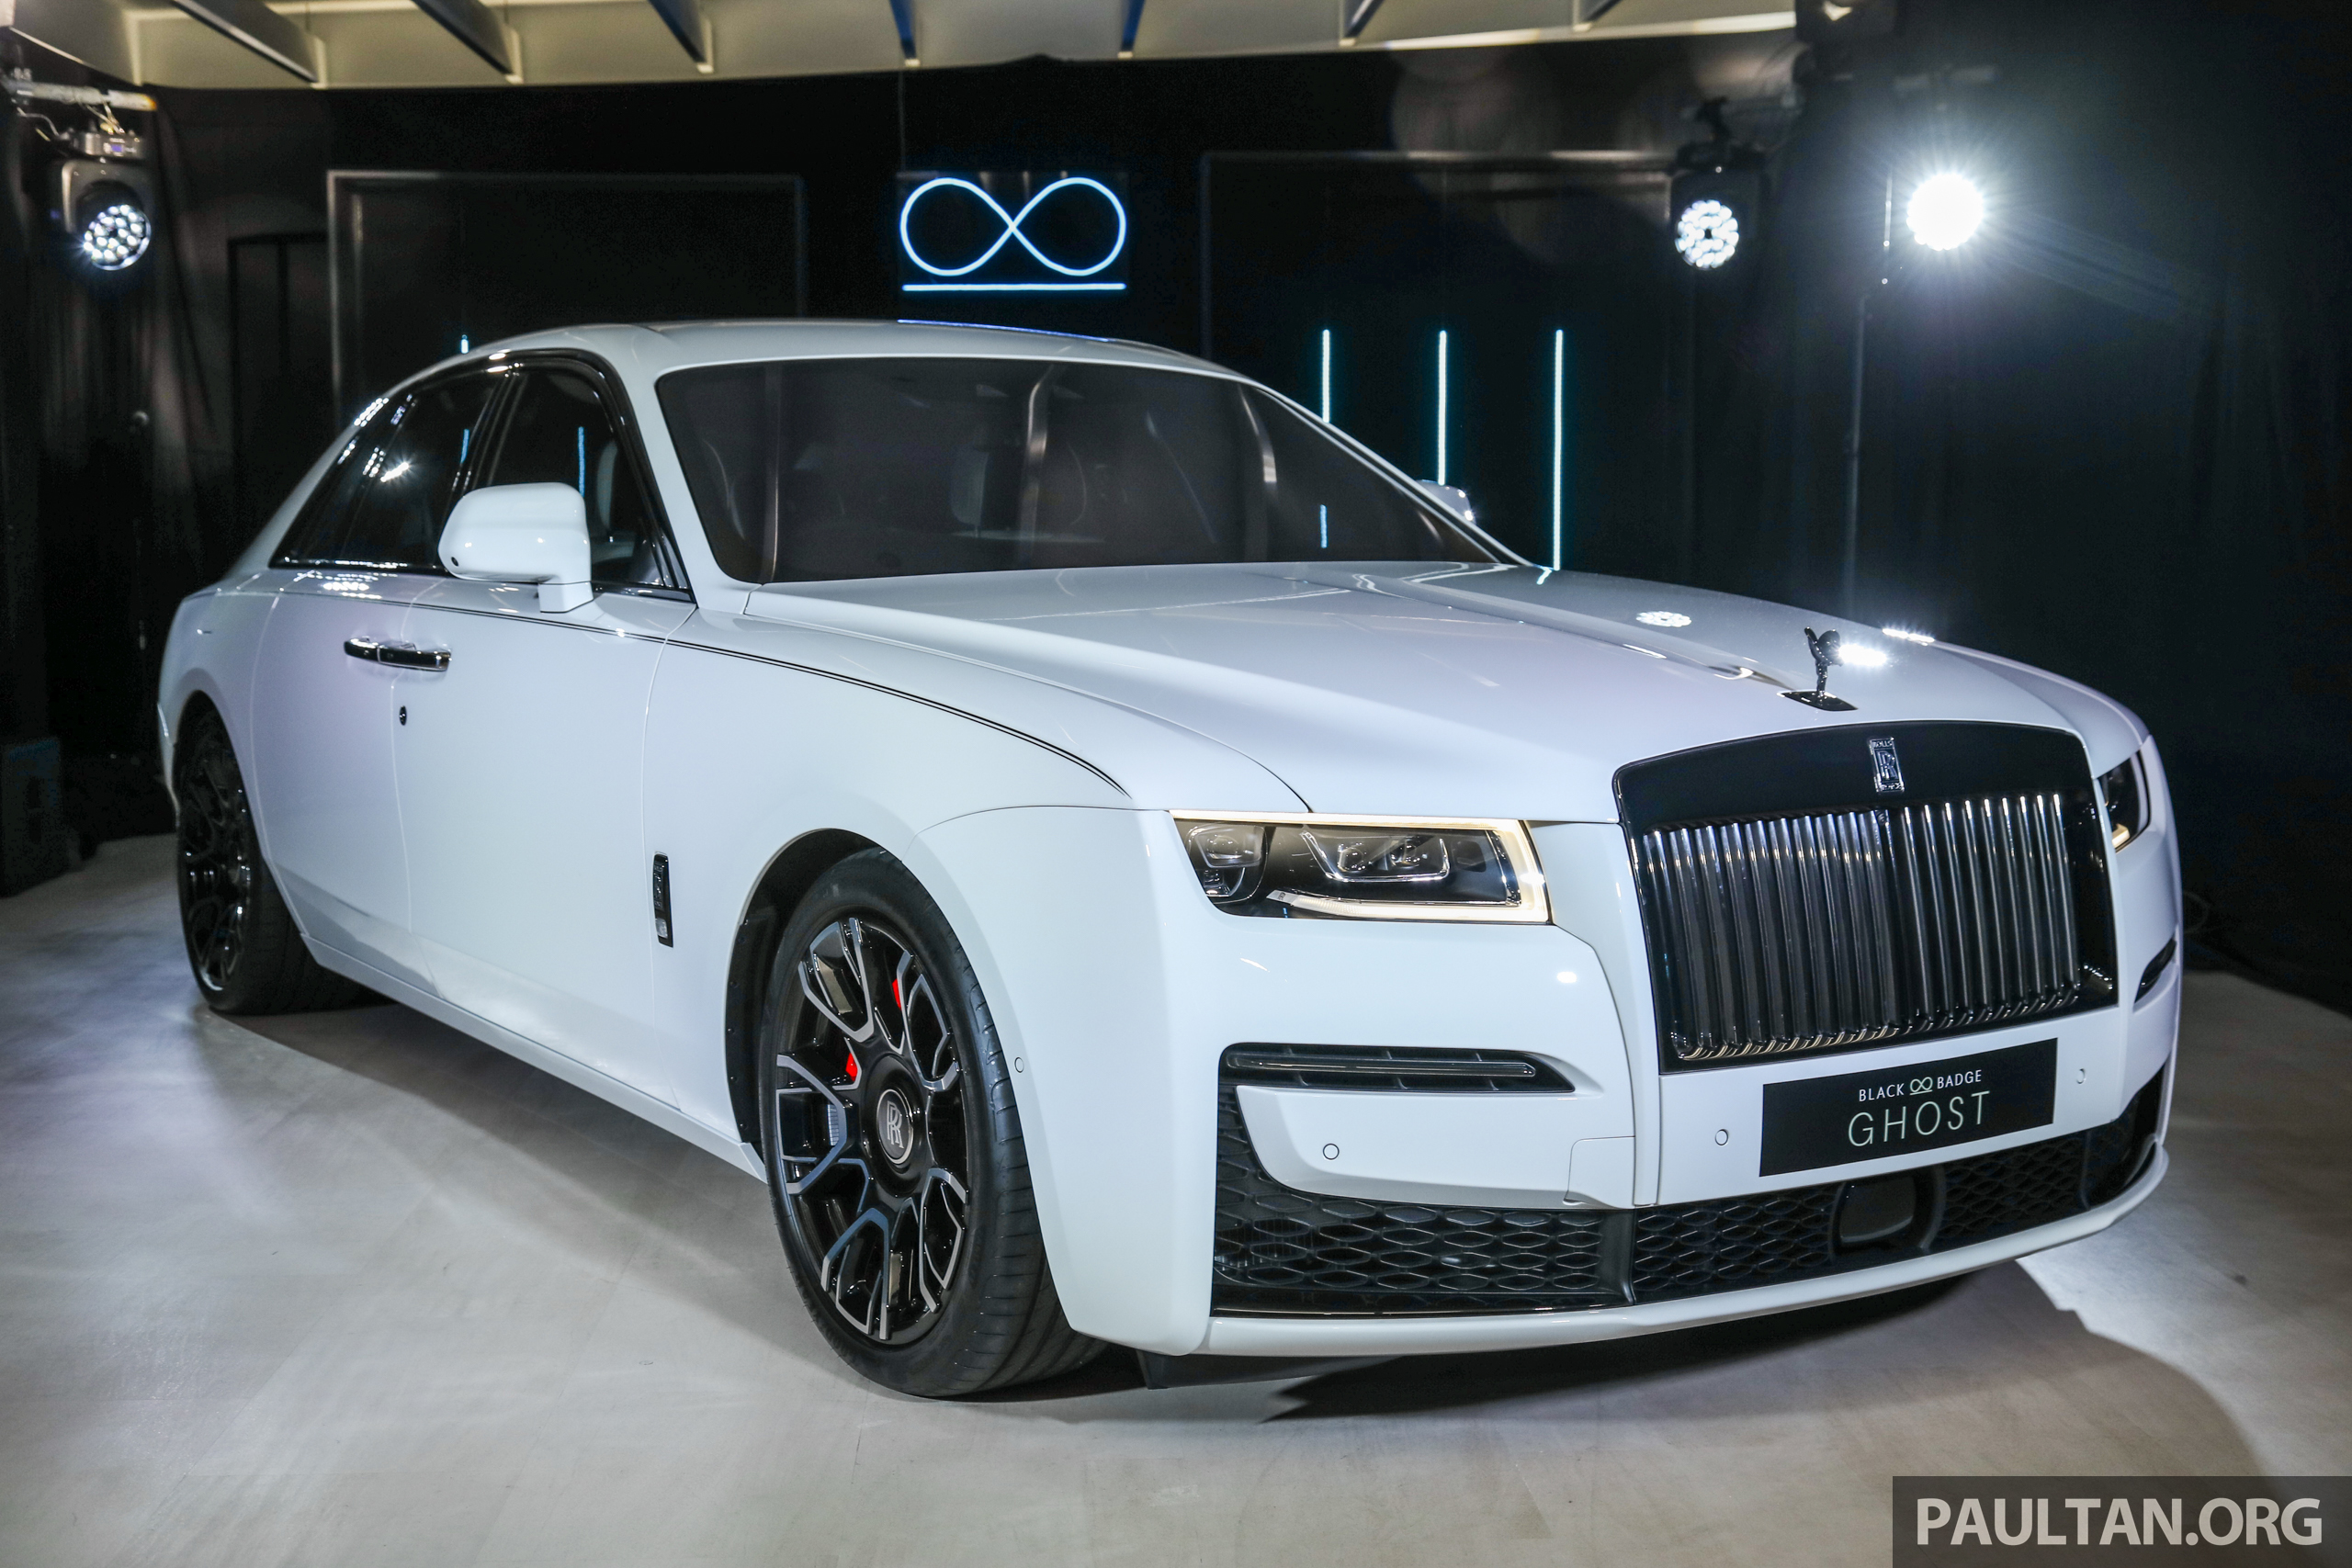 2021 RollsRoyce Ghost Black Badge  Now in pictures  CarWale